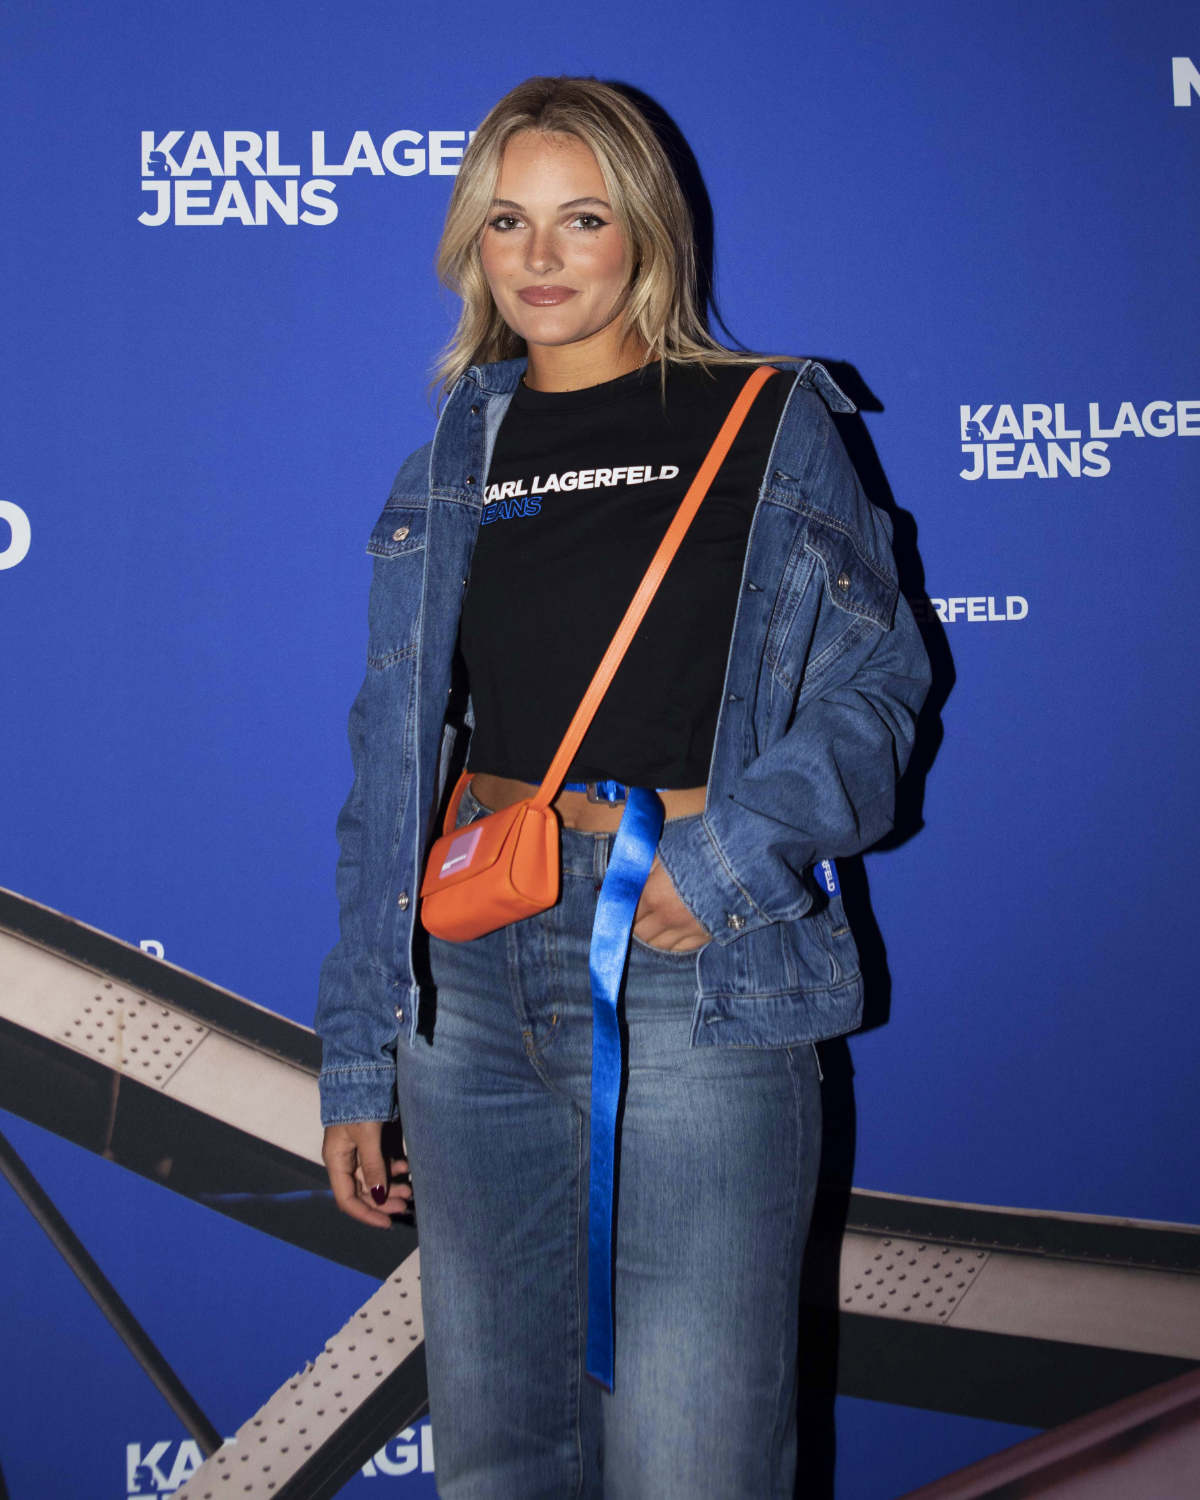 Karl Lagerfeld Jeans Party In Paris